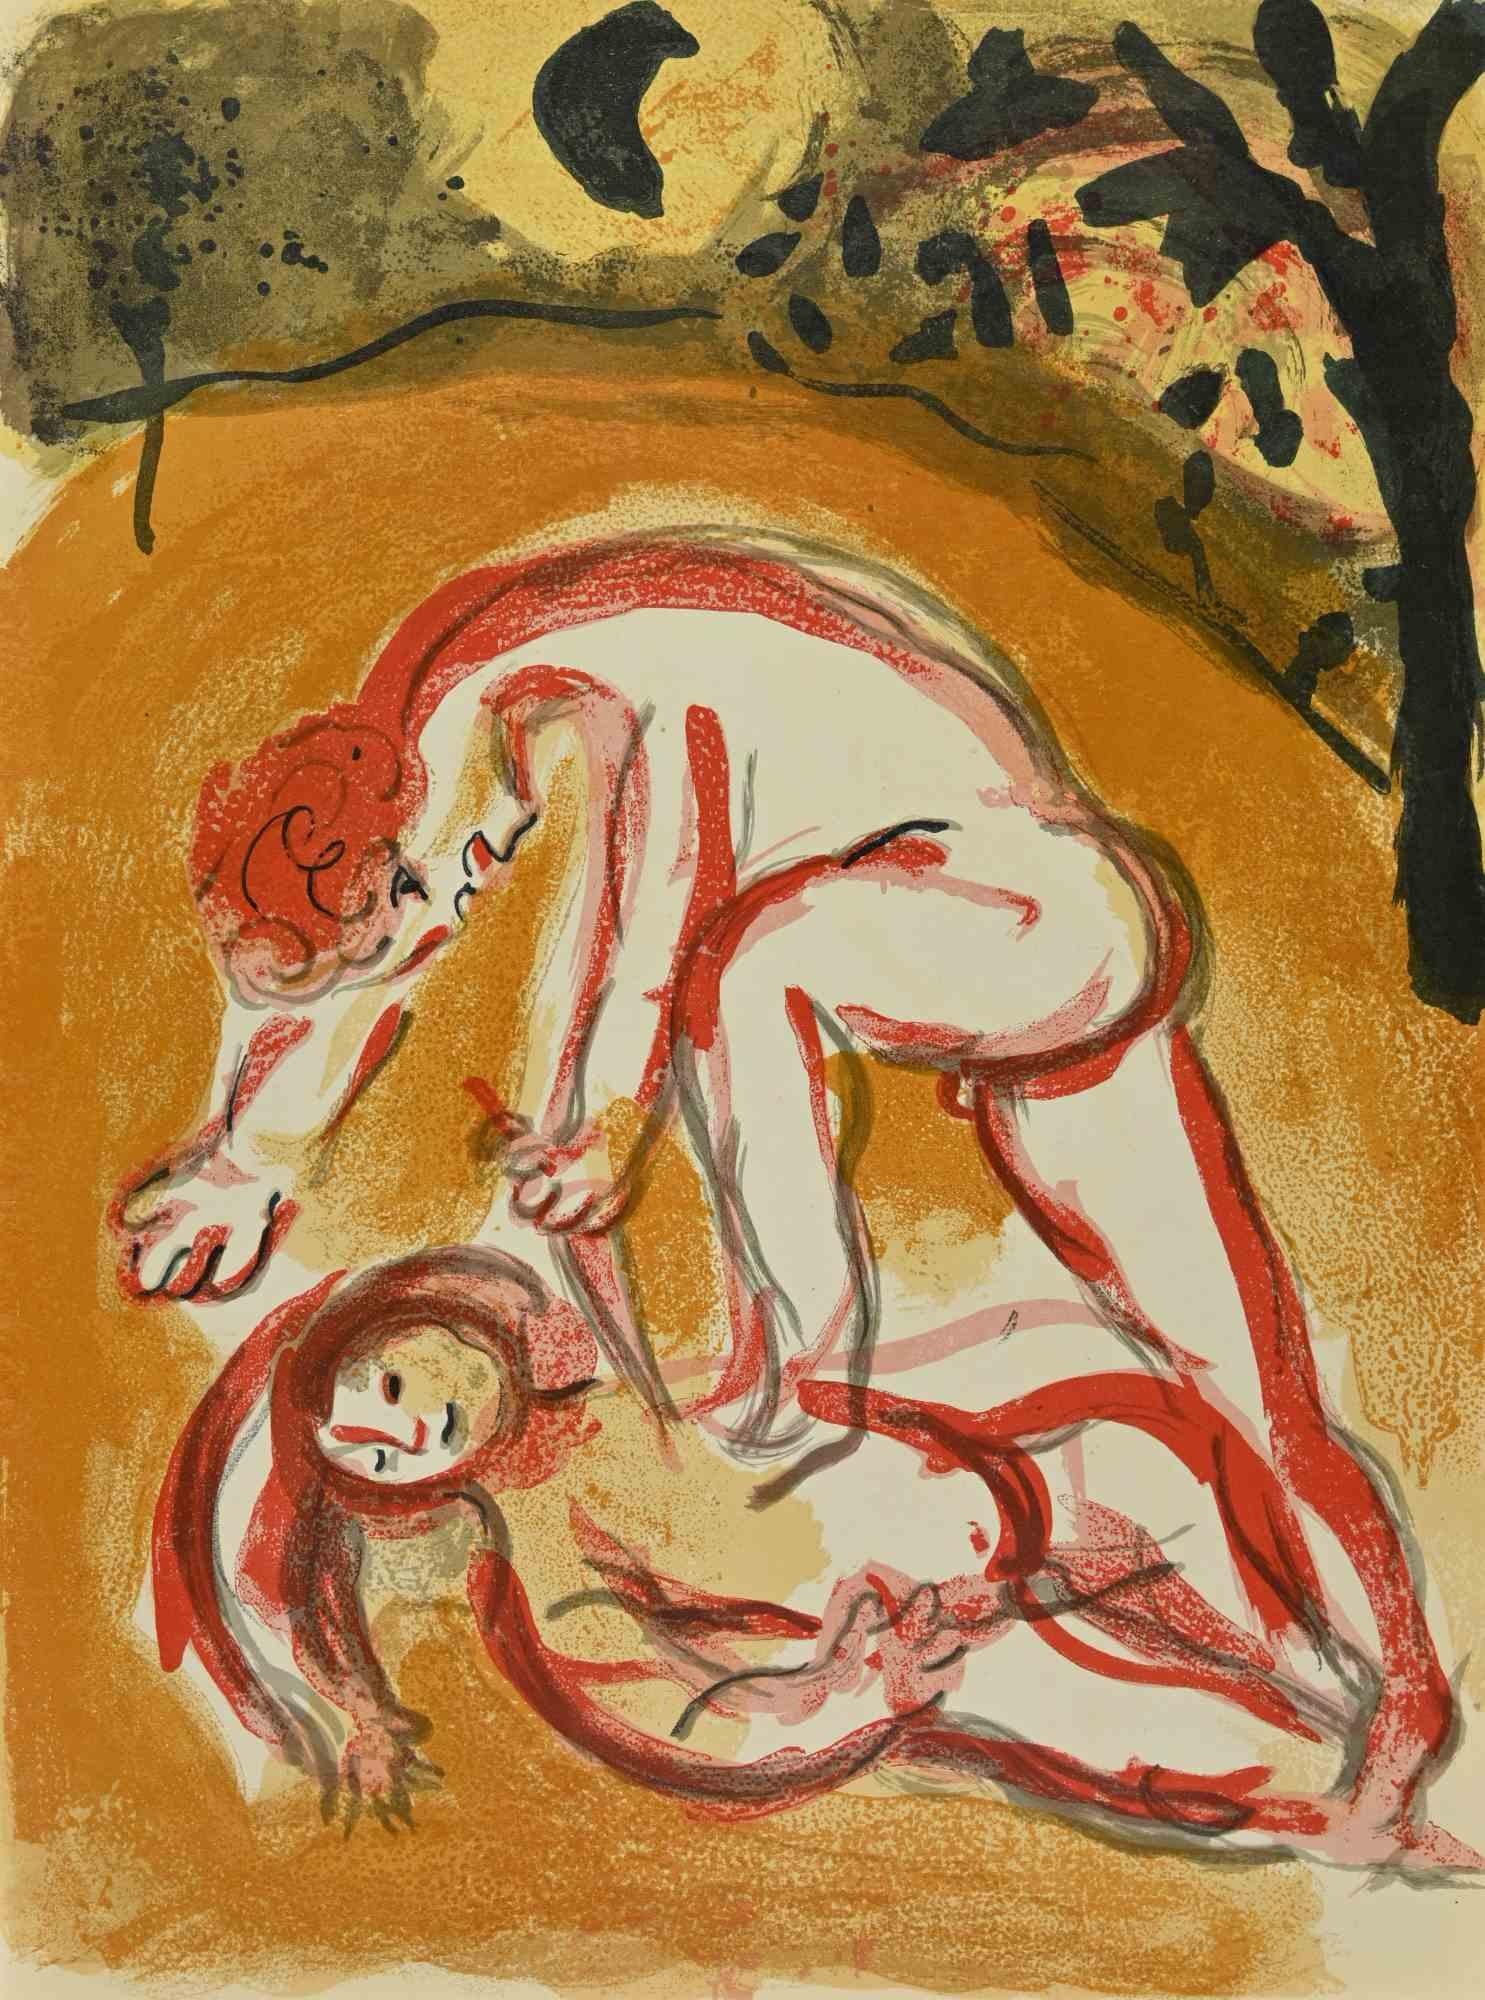 Cain and Abel  is an artwork from the Series "The Bible", by Marc Chagall in 1960.
Mixed colored lithograph on brown-toned paper, no signature.
Edition of 6500 unsigned lithographs. Printed by Mourlot and published by Tériade, Paris.
Excellent